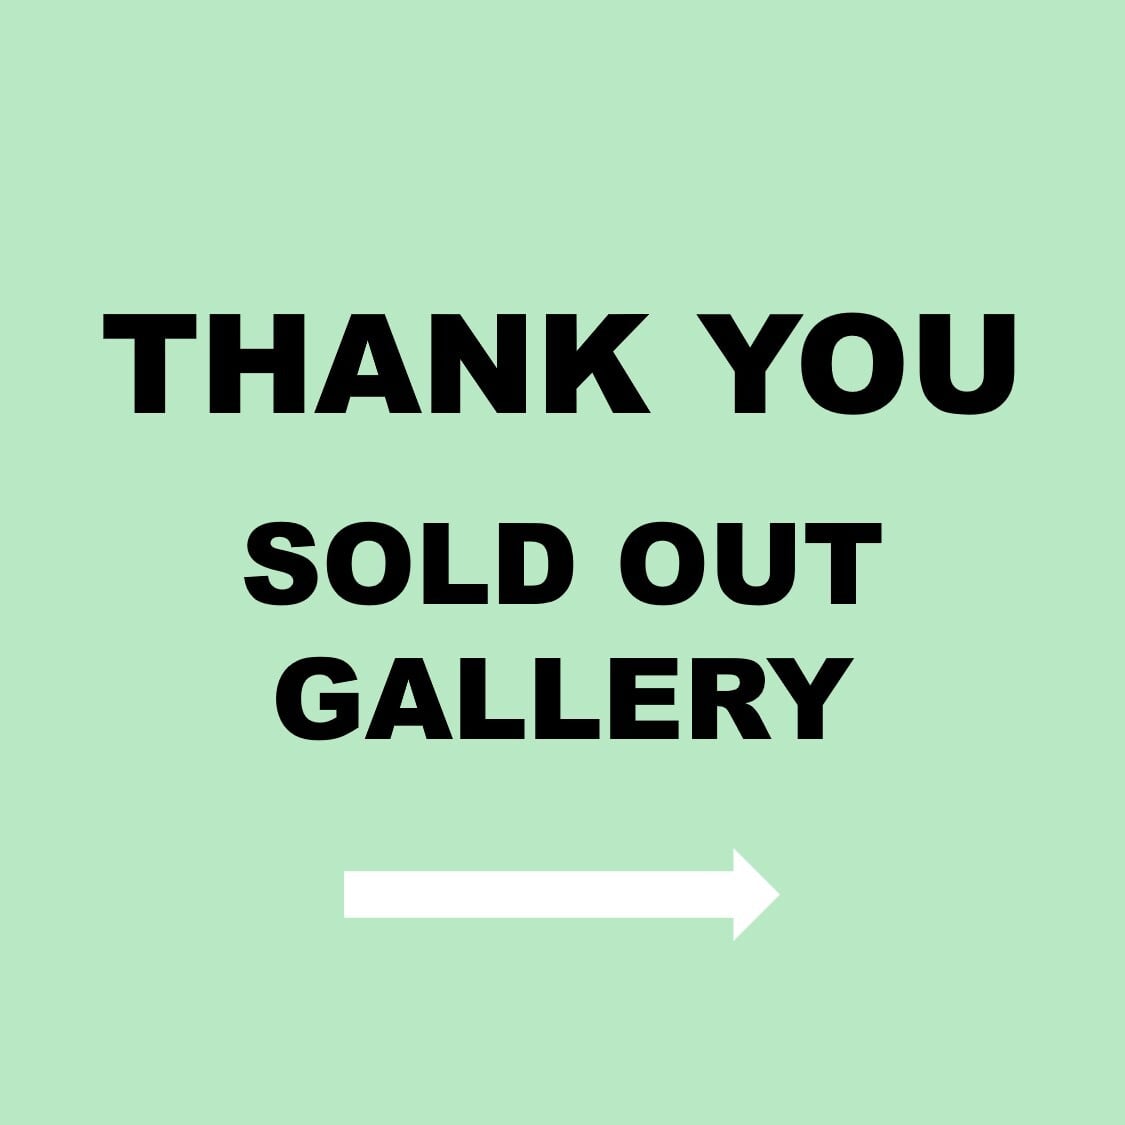 THANK YOU Sold out gallery ➡